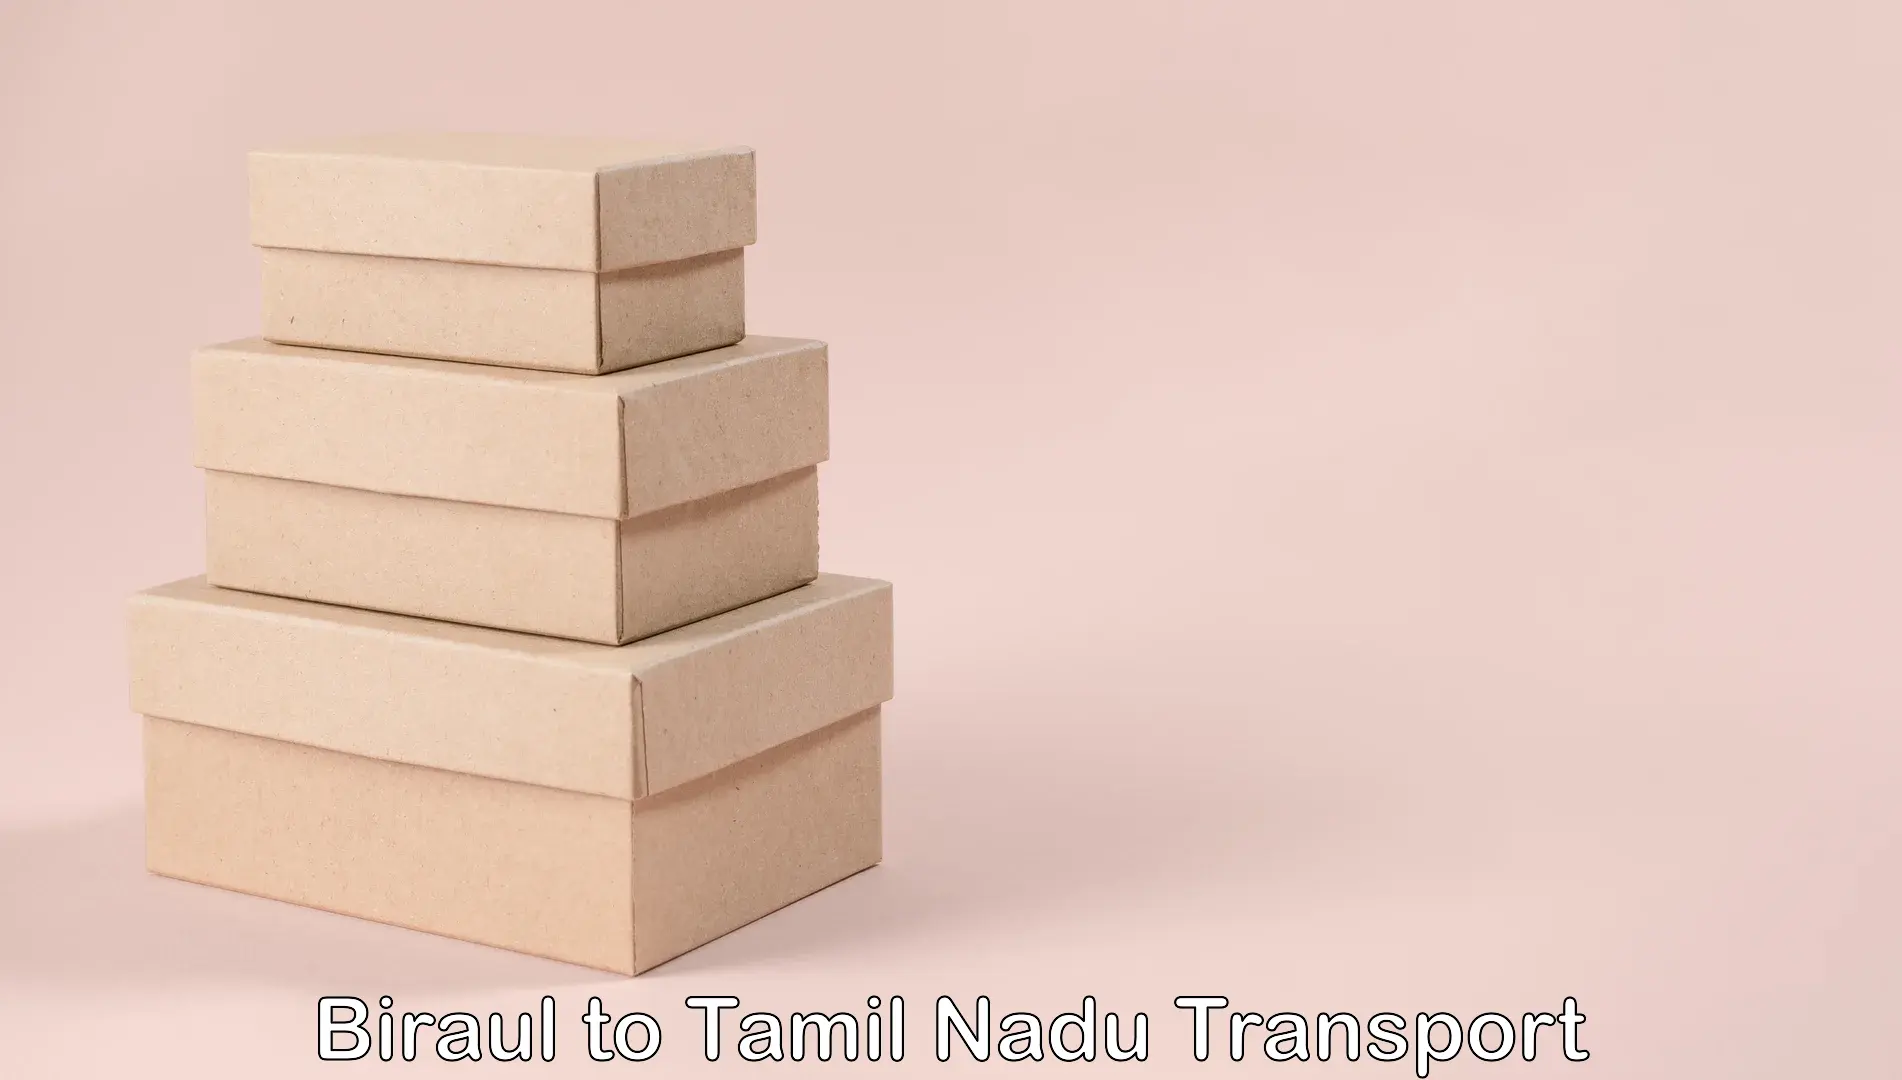 Domestic goods transportation services Biraul to Sri Ramachandra Institute of Higher Education and Research Chennai